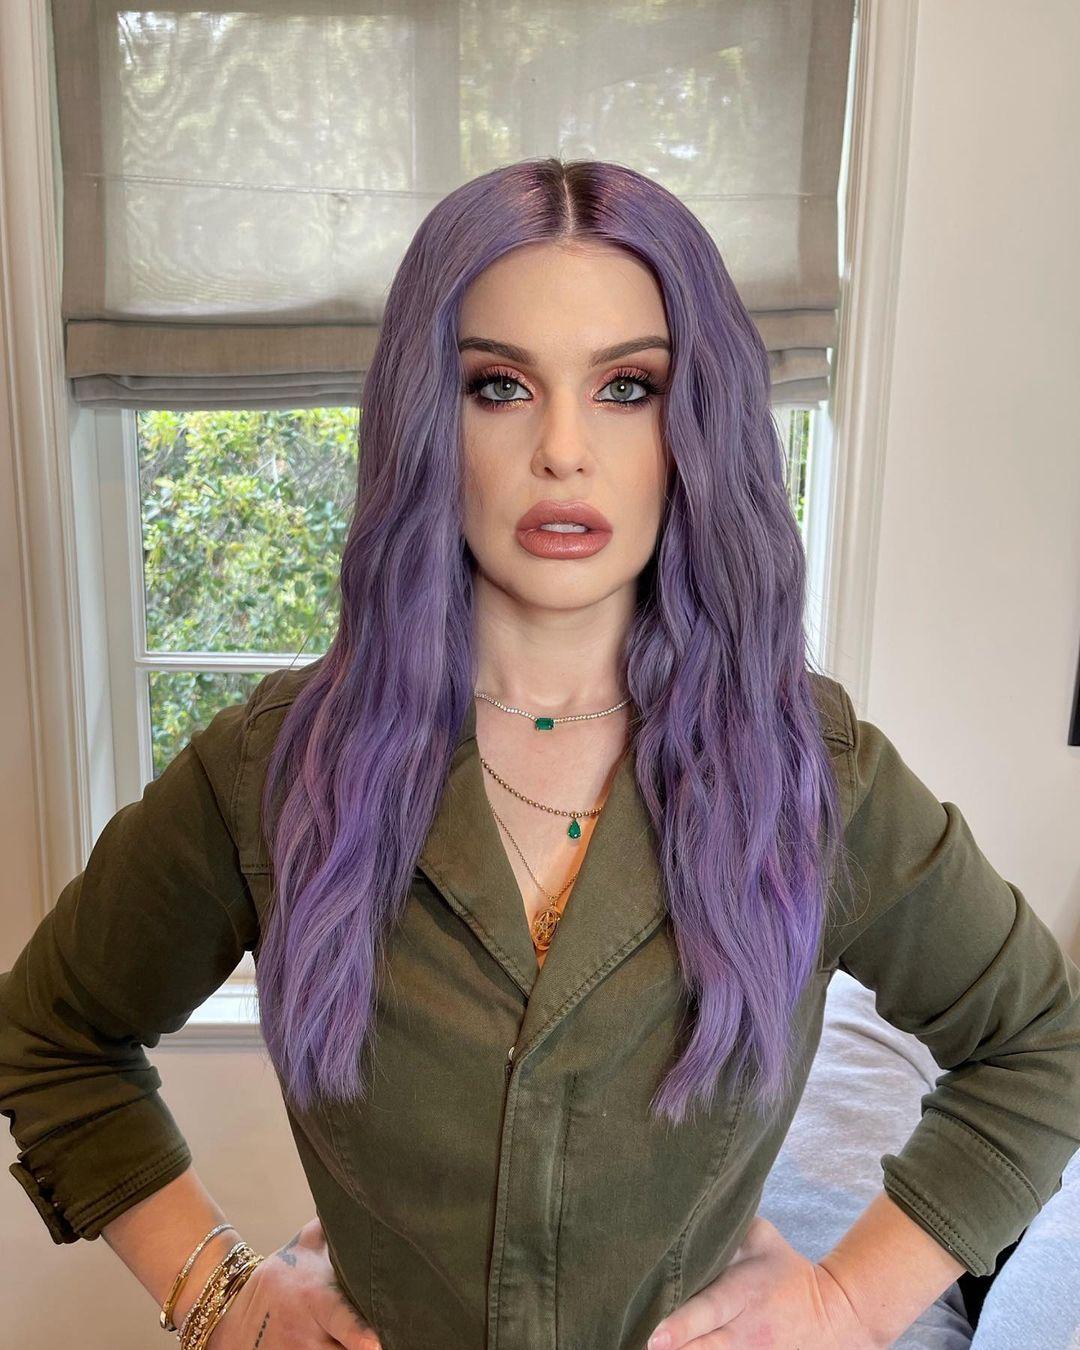 Kelly Osbourne flaunts weight loss in new photos